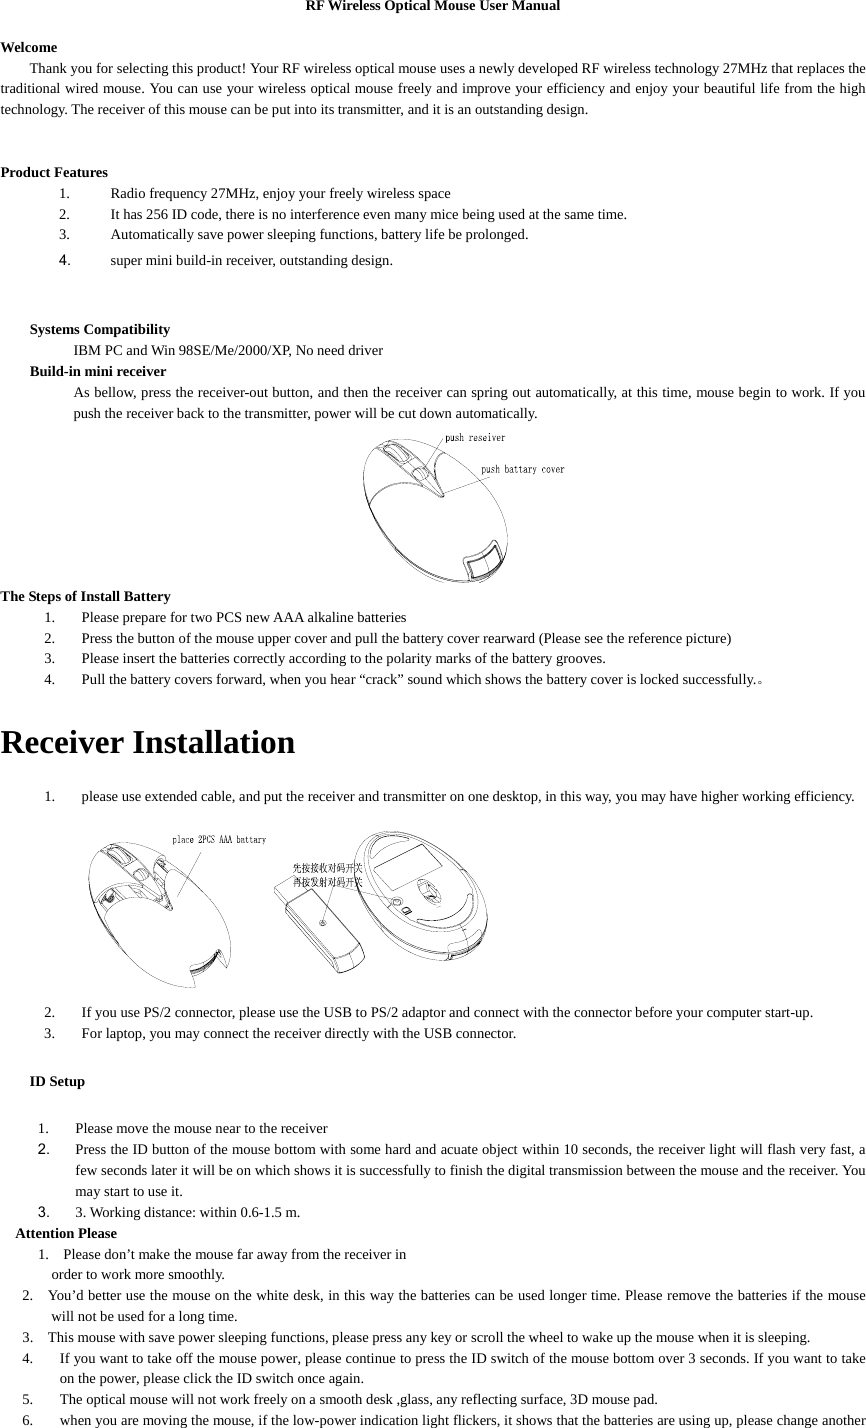 RF Wireless Optical Mouse User Manual  Welcome Thank you for selecting this product! Your RF wireless optical mouse uses a newly developed RF wireless technology 27MHz that replaces the traditional wired mouse. You can use your wireless optical mouse freely and improve your efficiency and enjoy your beautiful life from the high technology. The receiver of this mouse can be put into its transmitter, and it is an outstanding design.   Product Features 1. Radio frequency 27MHz, enjoy your freely wireless space 2. It has 256 ID code, there is no interference even many mice being used at the same time. 3. Automatically save power sleeping functions, battery life be prolonged. 4. super mini build-in receiver, outstanding design.   Systems Compatibility     IBM PC and Win 98SE/Me/2000/XP, No need driver Build-in mini receiver As bellow, press the receiver-out button, and then the receiver can spring out automatically, at this time, mouse begin to work. If you push the receiver back to the transmitter, power will be cut down automatically.  The Steps of Install Battery 1. Please prepare for two PCS new AAA alkaline batteries 2. Press the button of the mouse upper cover and pull the battery cover rearward (Please see the reference picture) 3. Please insert the batteries correctly according to the polarity marks of the battery grooves. 4. Pull the battery covers forward, when you hear “crack” sound which shows the battery cover is locked successfully.。  Receiver Installation 1. please use extended cable, and put the receiver and transmitter on one desktop, in this way, you may have higher working efficiency.  2. If you use PS/2 connector, please use the USB to PS/2 adaptor and connect with the connector before your computer start-up. 3. For laptop, you may connect the receiver directly with the USB connector. ID Setup 1. Please move the mouse near to the receiver 2. Press the ID button of the mouse bottom with some hard and acuate object within 10 seconds, the receiver light will flash very fast, a few seconds later it will be on which shows it is successfully to finish the digital transmission between the mouse and the receiver. You may start to use it. 3. 3. Working distance: within 0.6-1.5 m. Attention Please 1.    Please don’t make the mouse far away from the receiver in order to work more smoothly. 2.    You’d better use the mouse on the white desk, in this way the batteries can be used longer time. Please remove the batteries if the mouse will not be used for a long time.   3.    This mouse with save power sleeping functions, please press any key or scroll the wheel to wake up the mouse when it is sleeping. 4. If you want to take off the mouse power, please continue to press the ID switch of the mouse bottom over 3 seconds. If you want to take on the power, please click the ID switch once again. 5. The optical mouse will not work freely on a smooth desk ,glass, any reflecting surface, 3D mouse pad. 6. when you are moving the mouse, if the low-power indication light flickers, it shows that the batteries are using up, please change another 